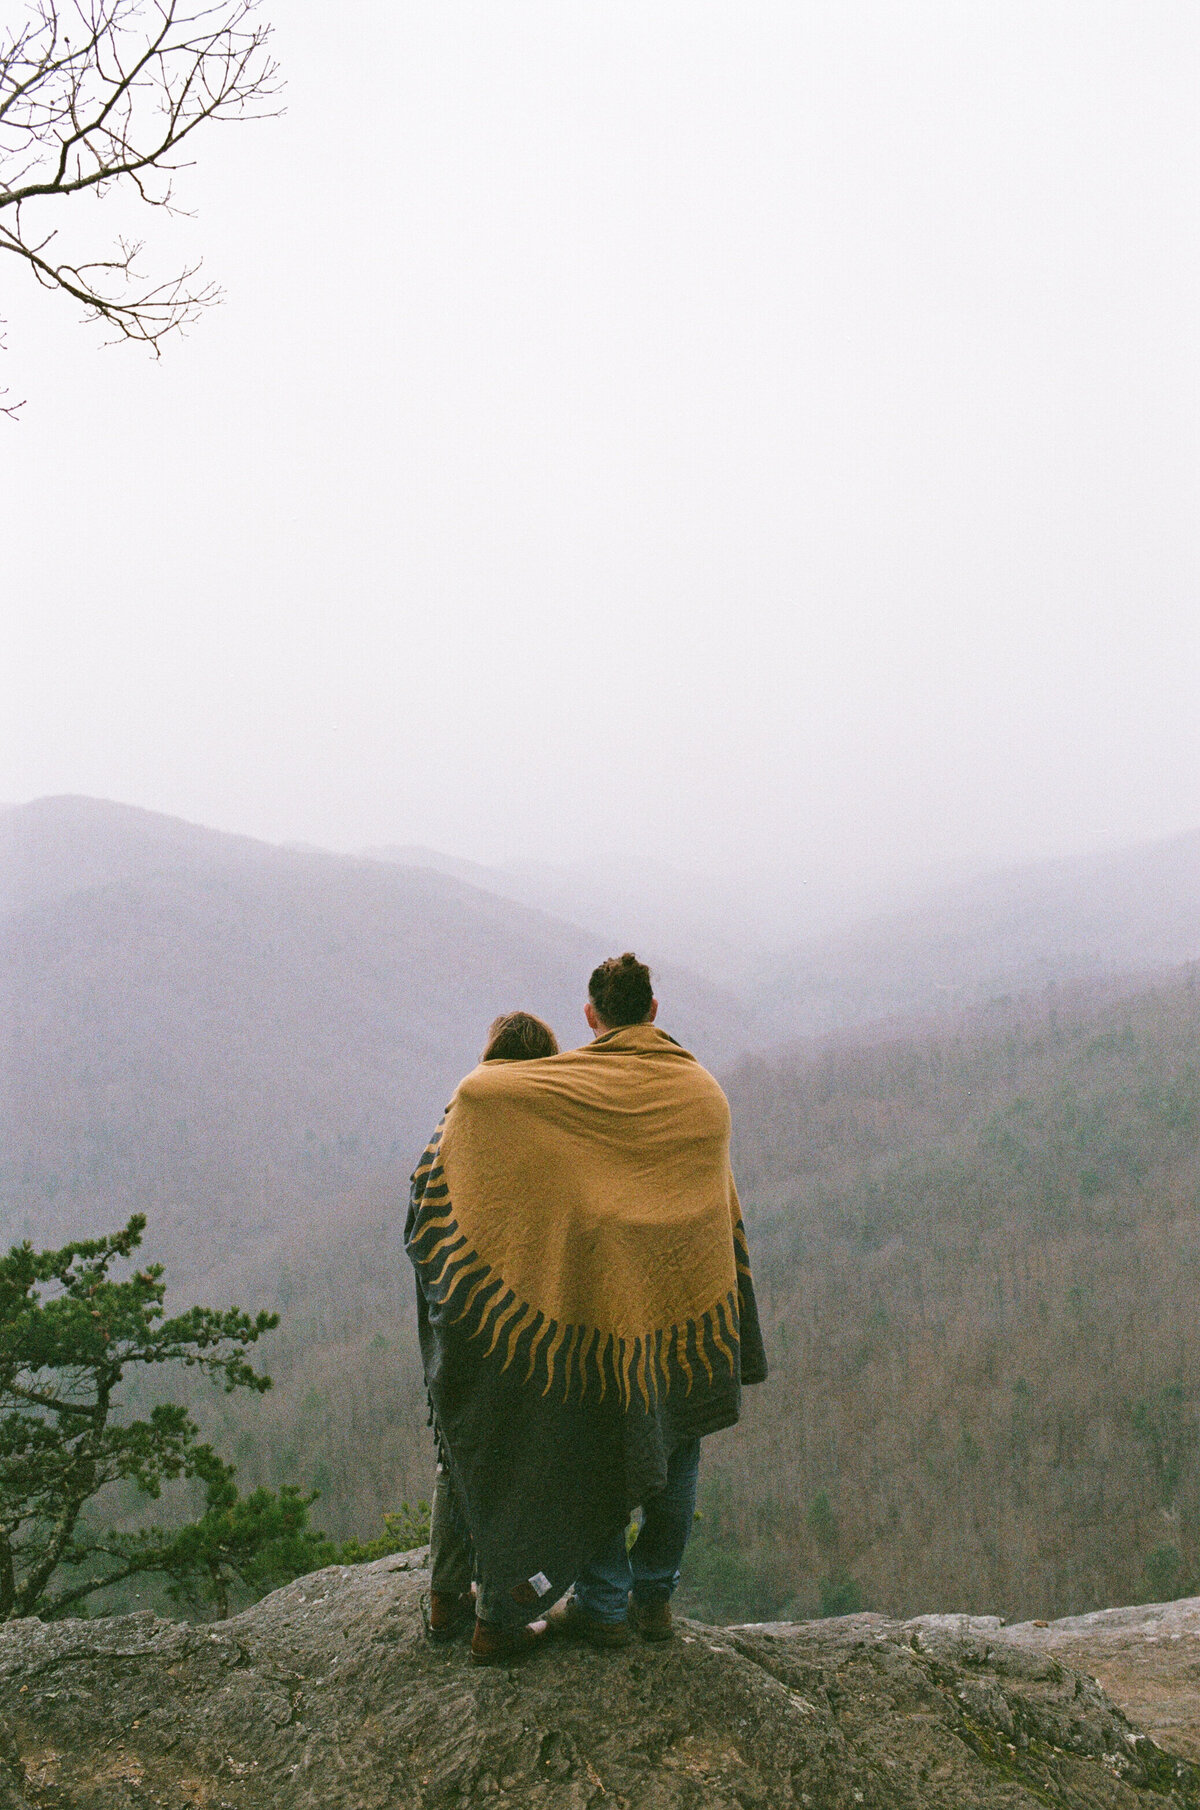 film image of couple in blanket overlooking a summit